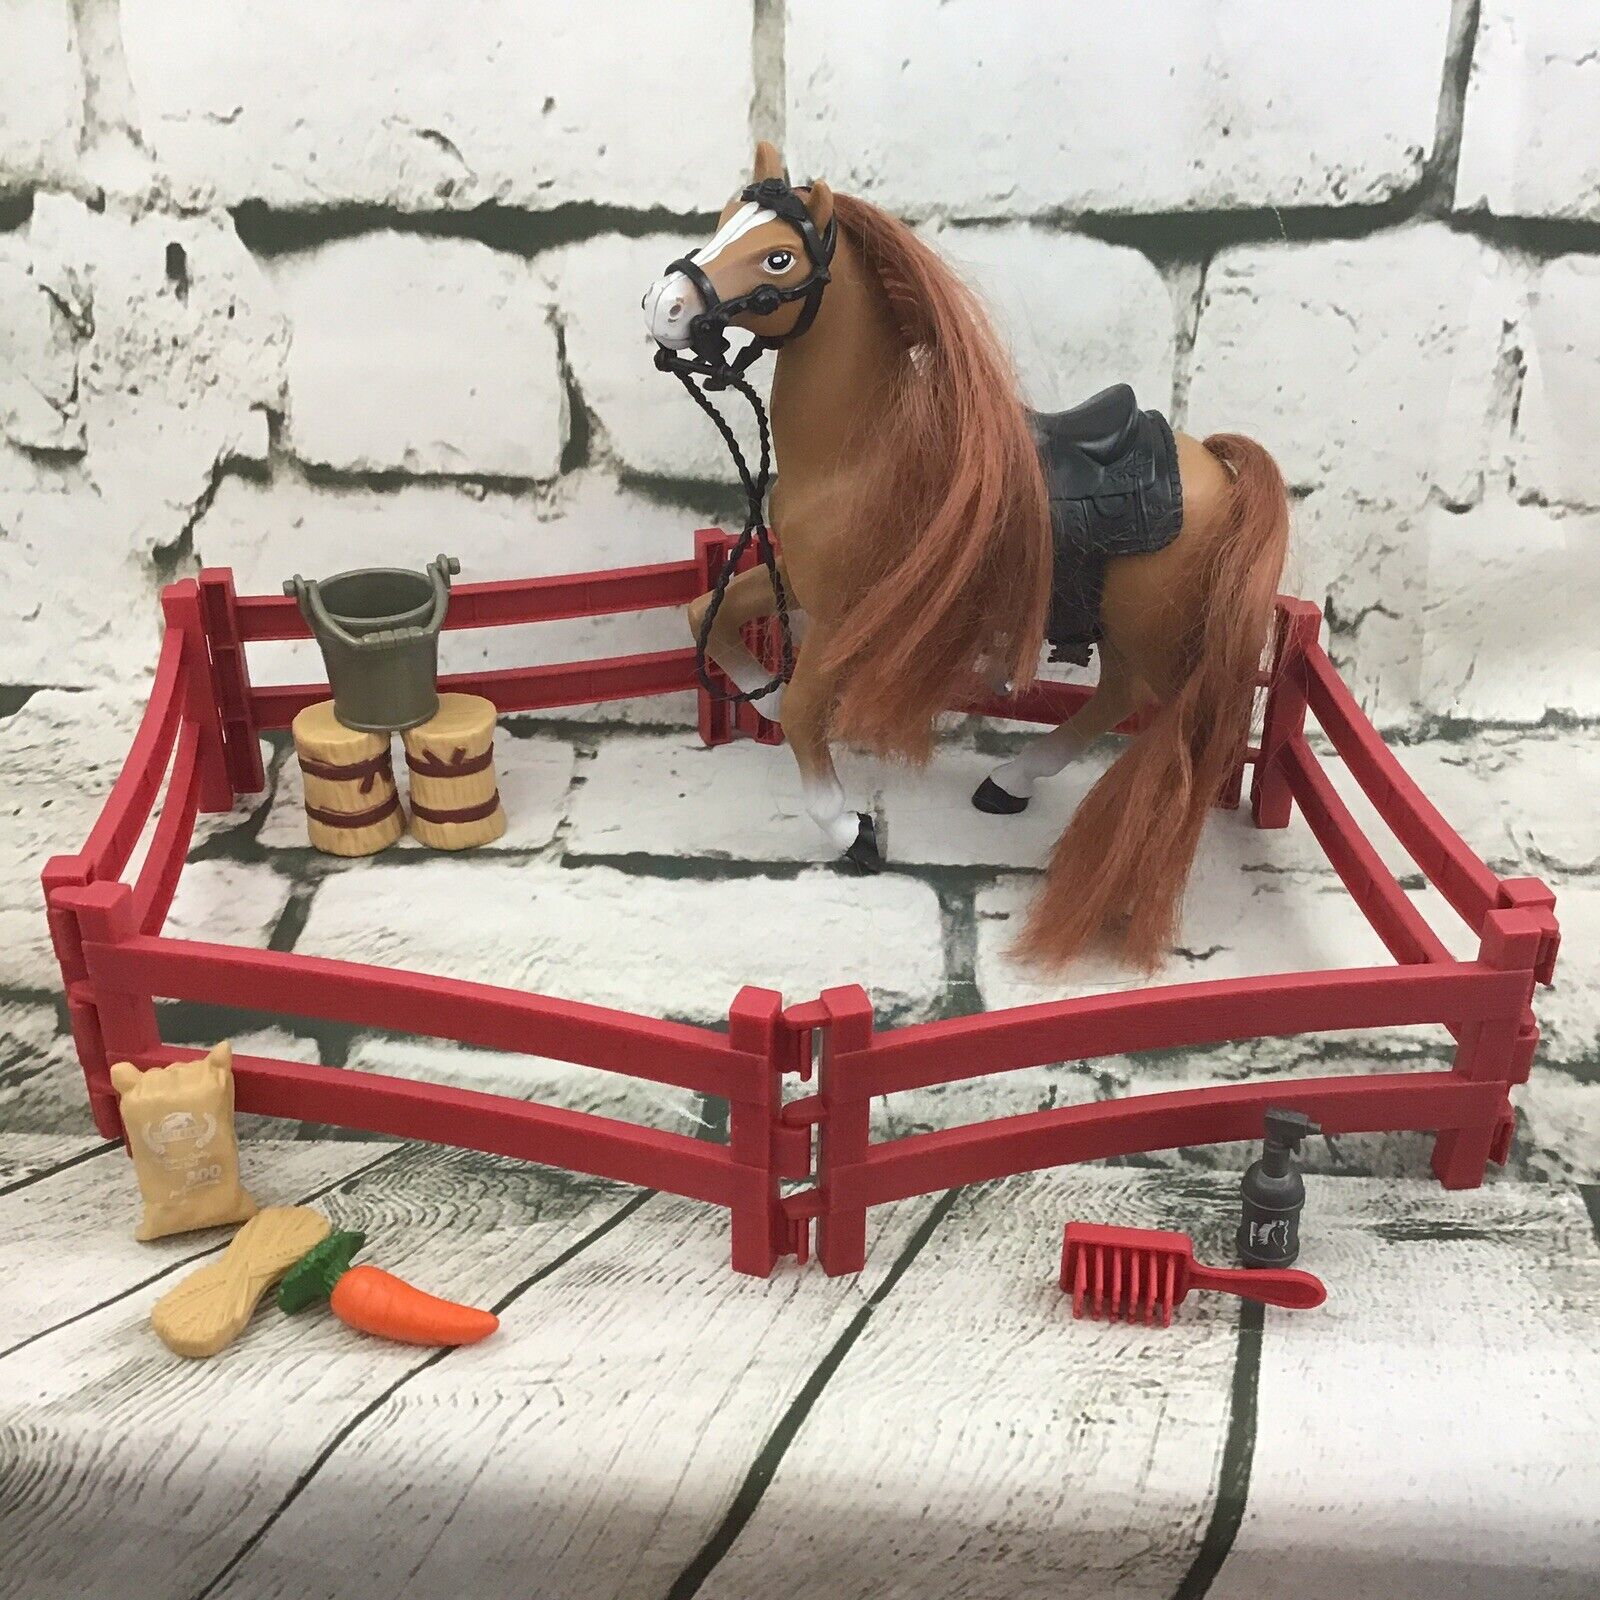 Lanard Royal Breeds Equestrian Play Set With Horse Figure Fence And Accessories